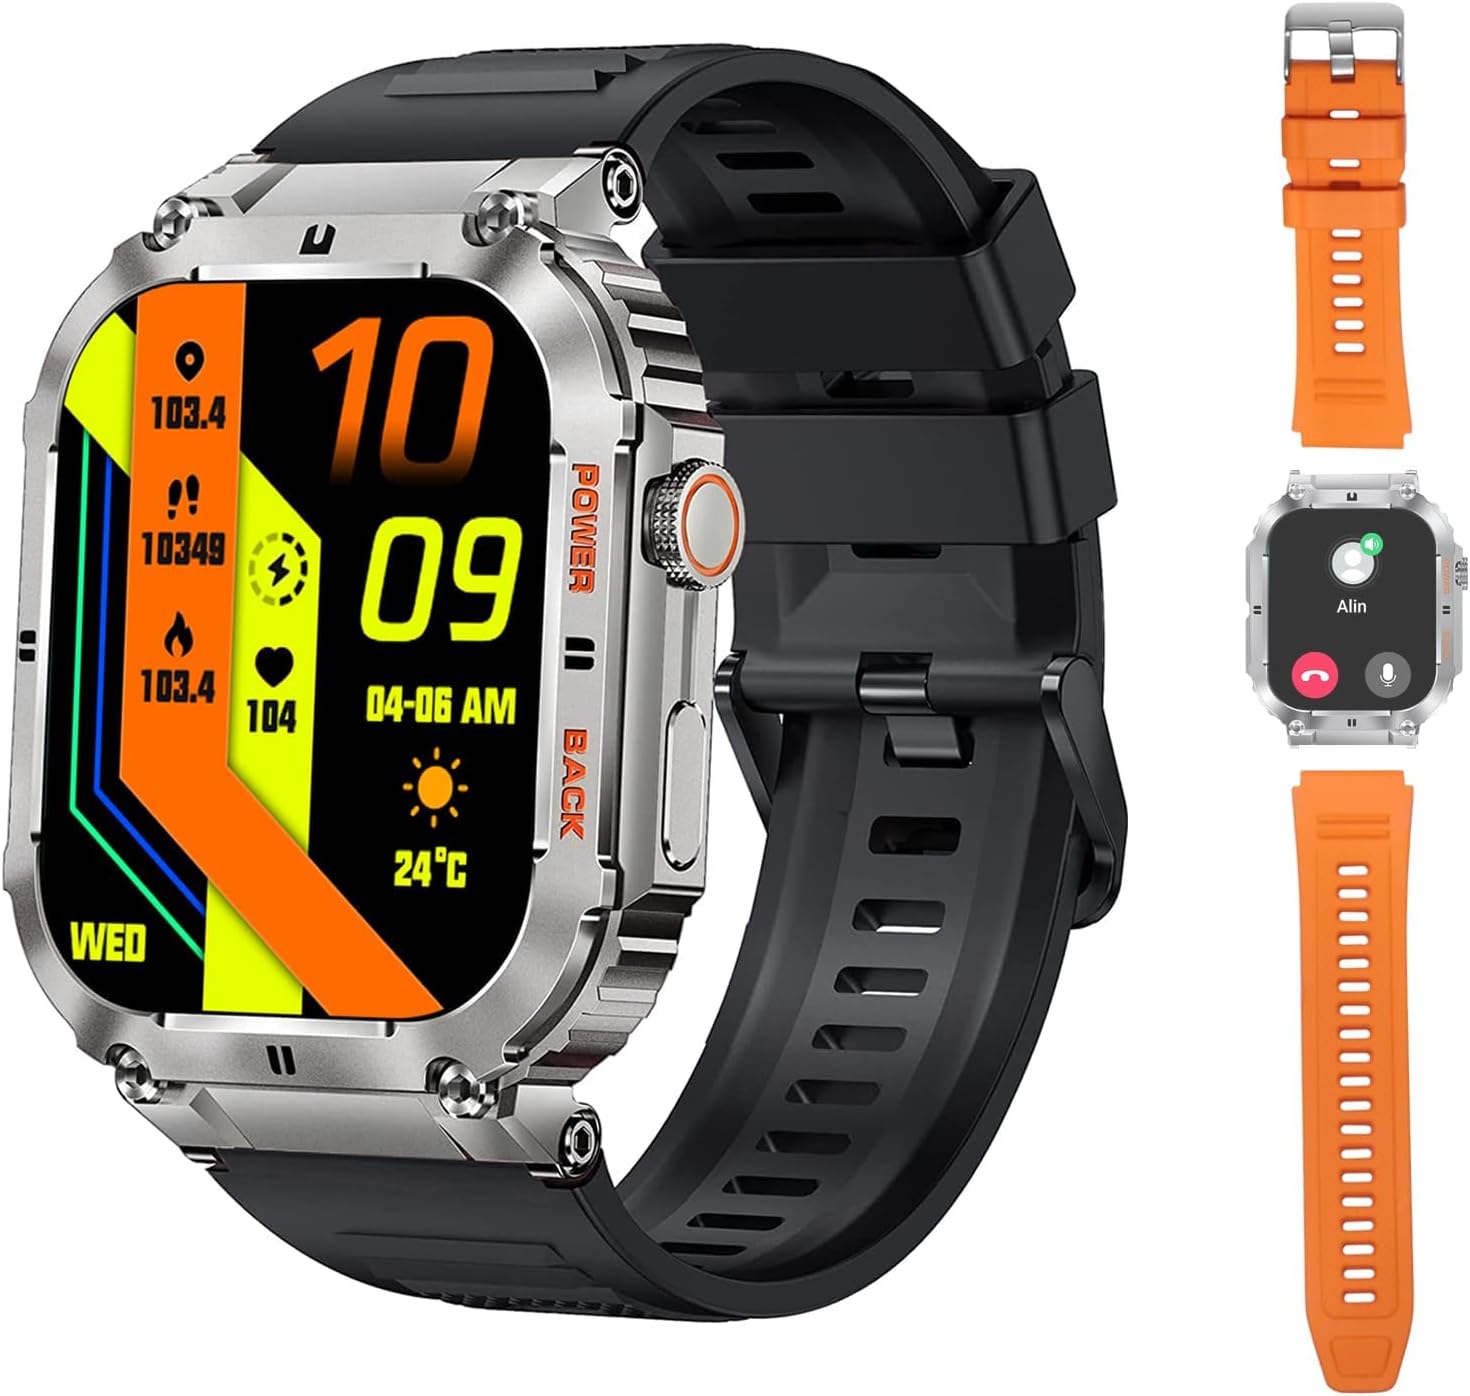 KACLUT Smart Watch Review: A Rugged Military Smartwatch for Durability and Functionality